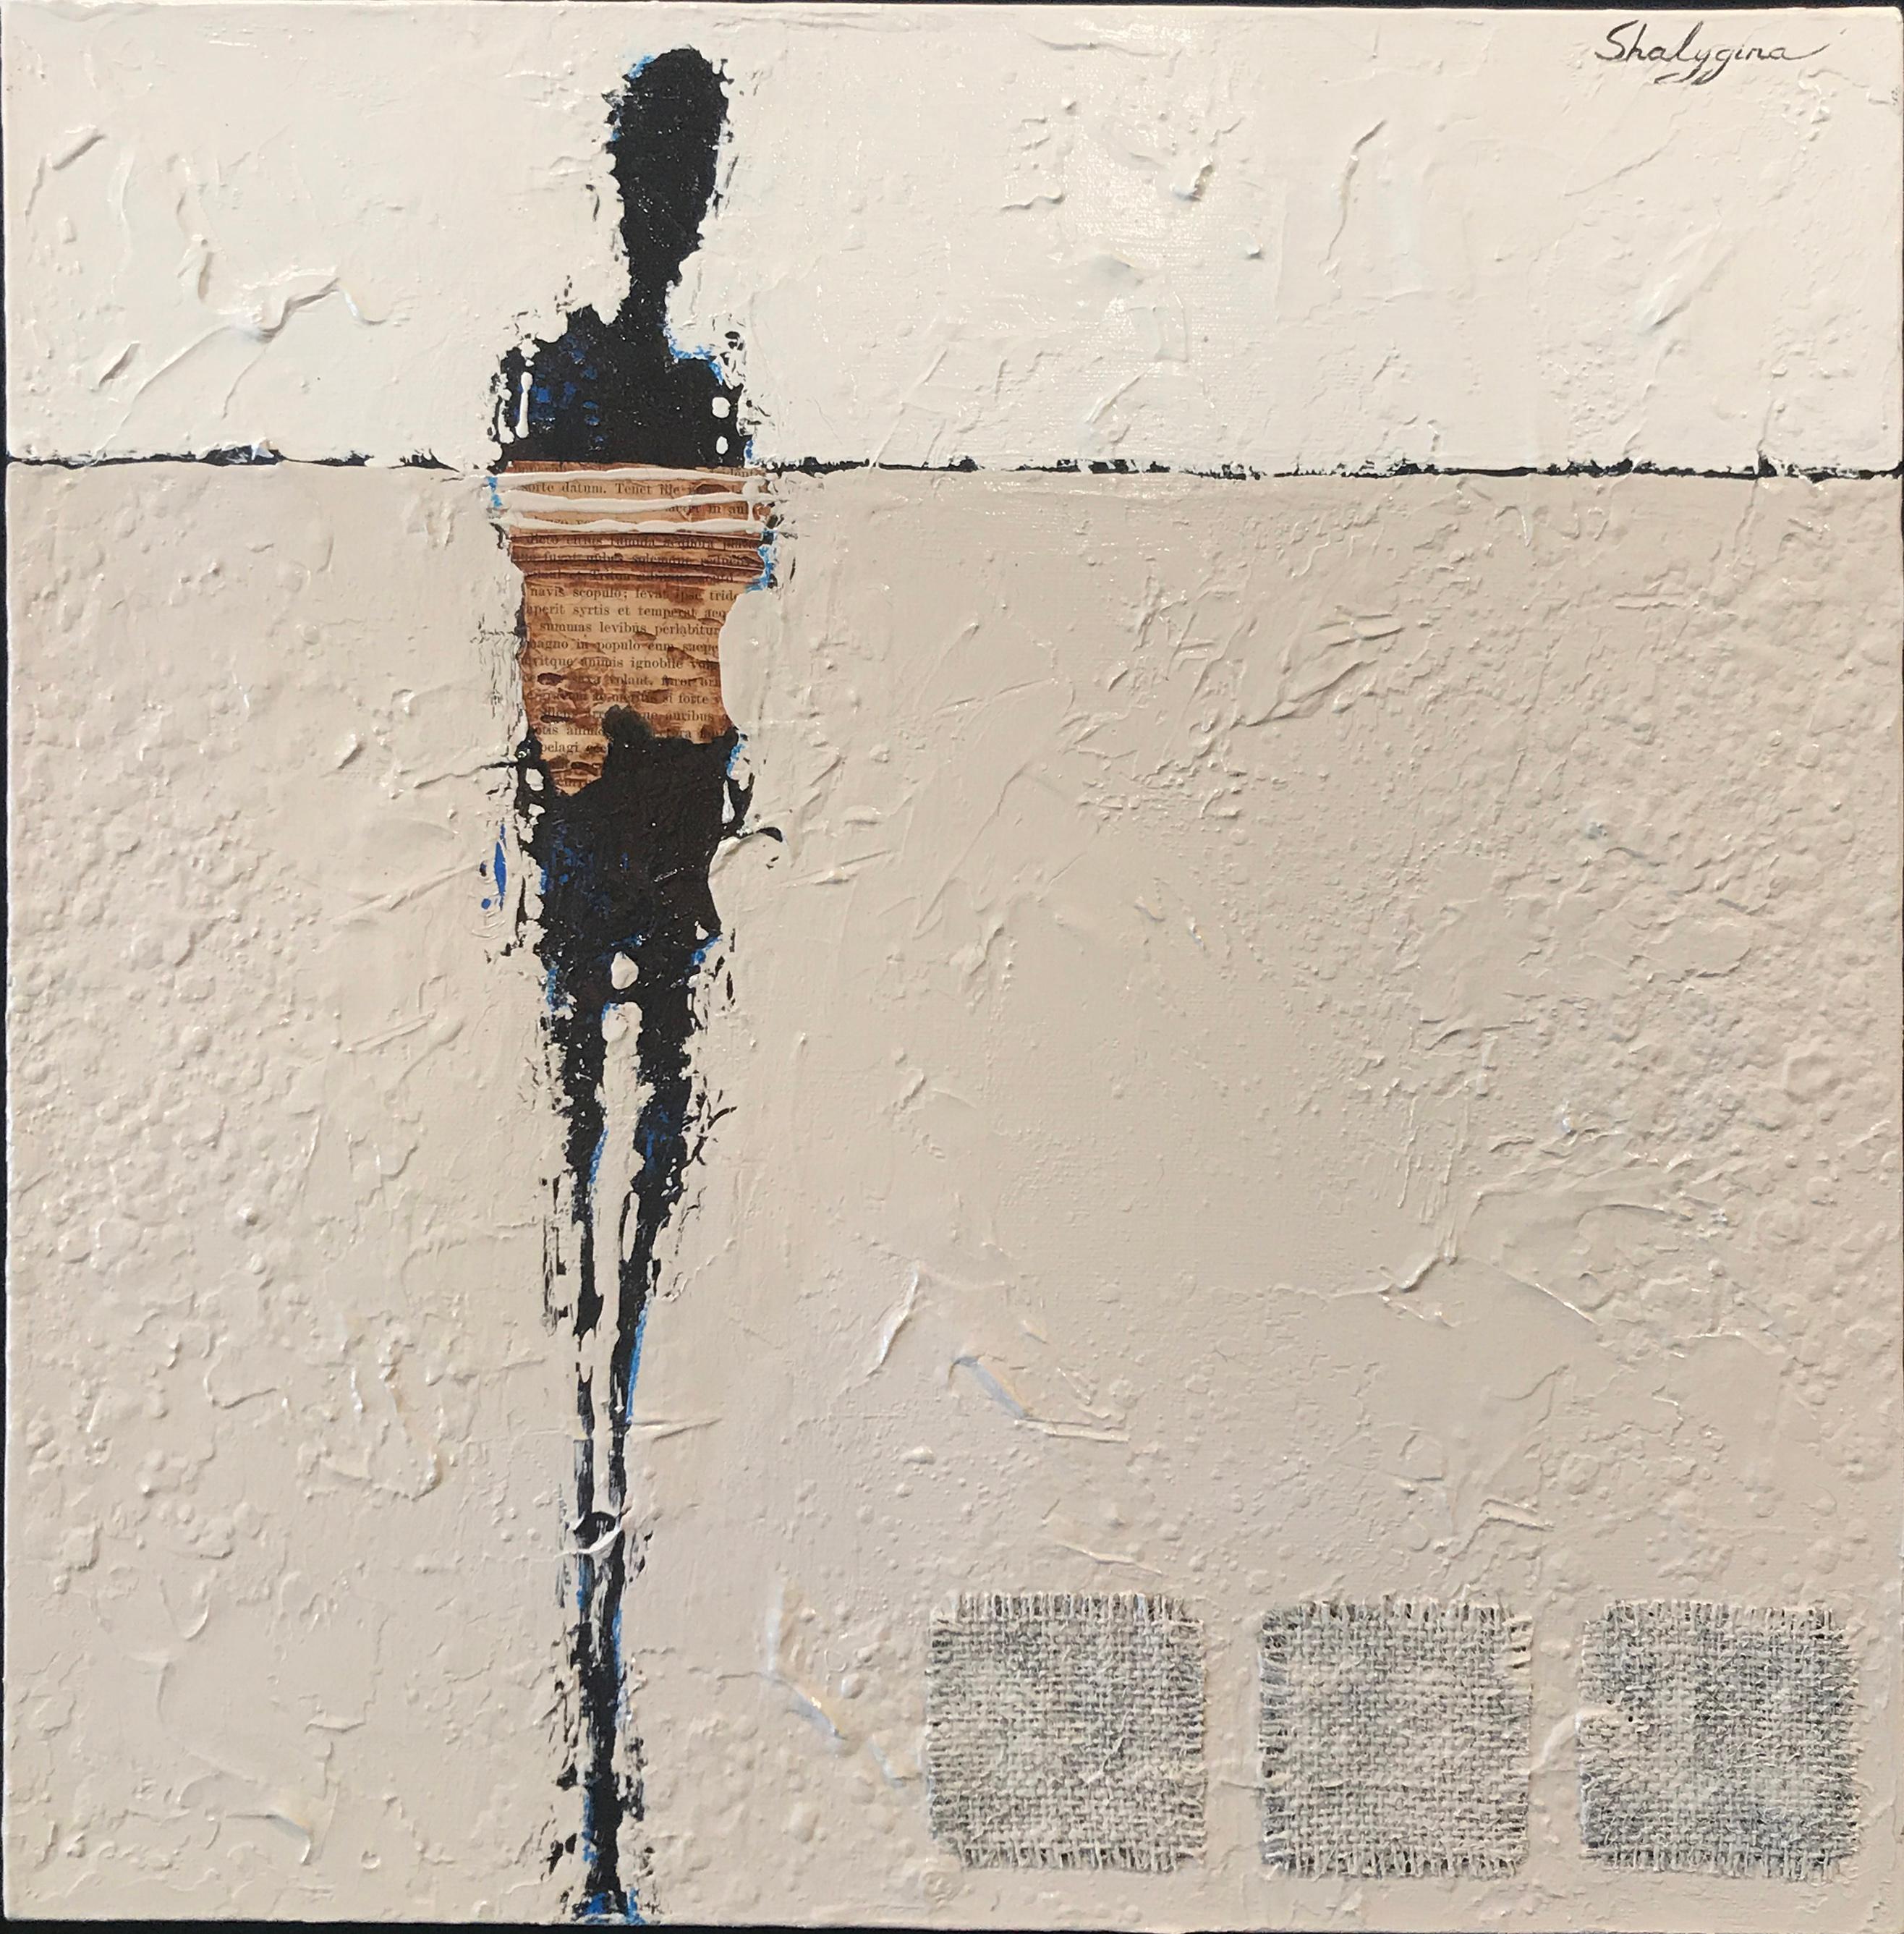 "Le Vent" is a mixed media work incorporating Latin script, patches of texture, and featuring the artists highly recognizable figure. 

Svetlana’s monochromatic and minimalistic abstract works are often compared to an orchestra and a symphony. The